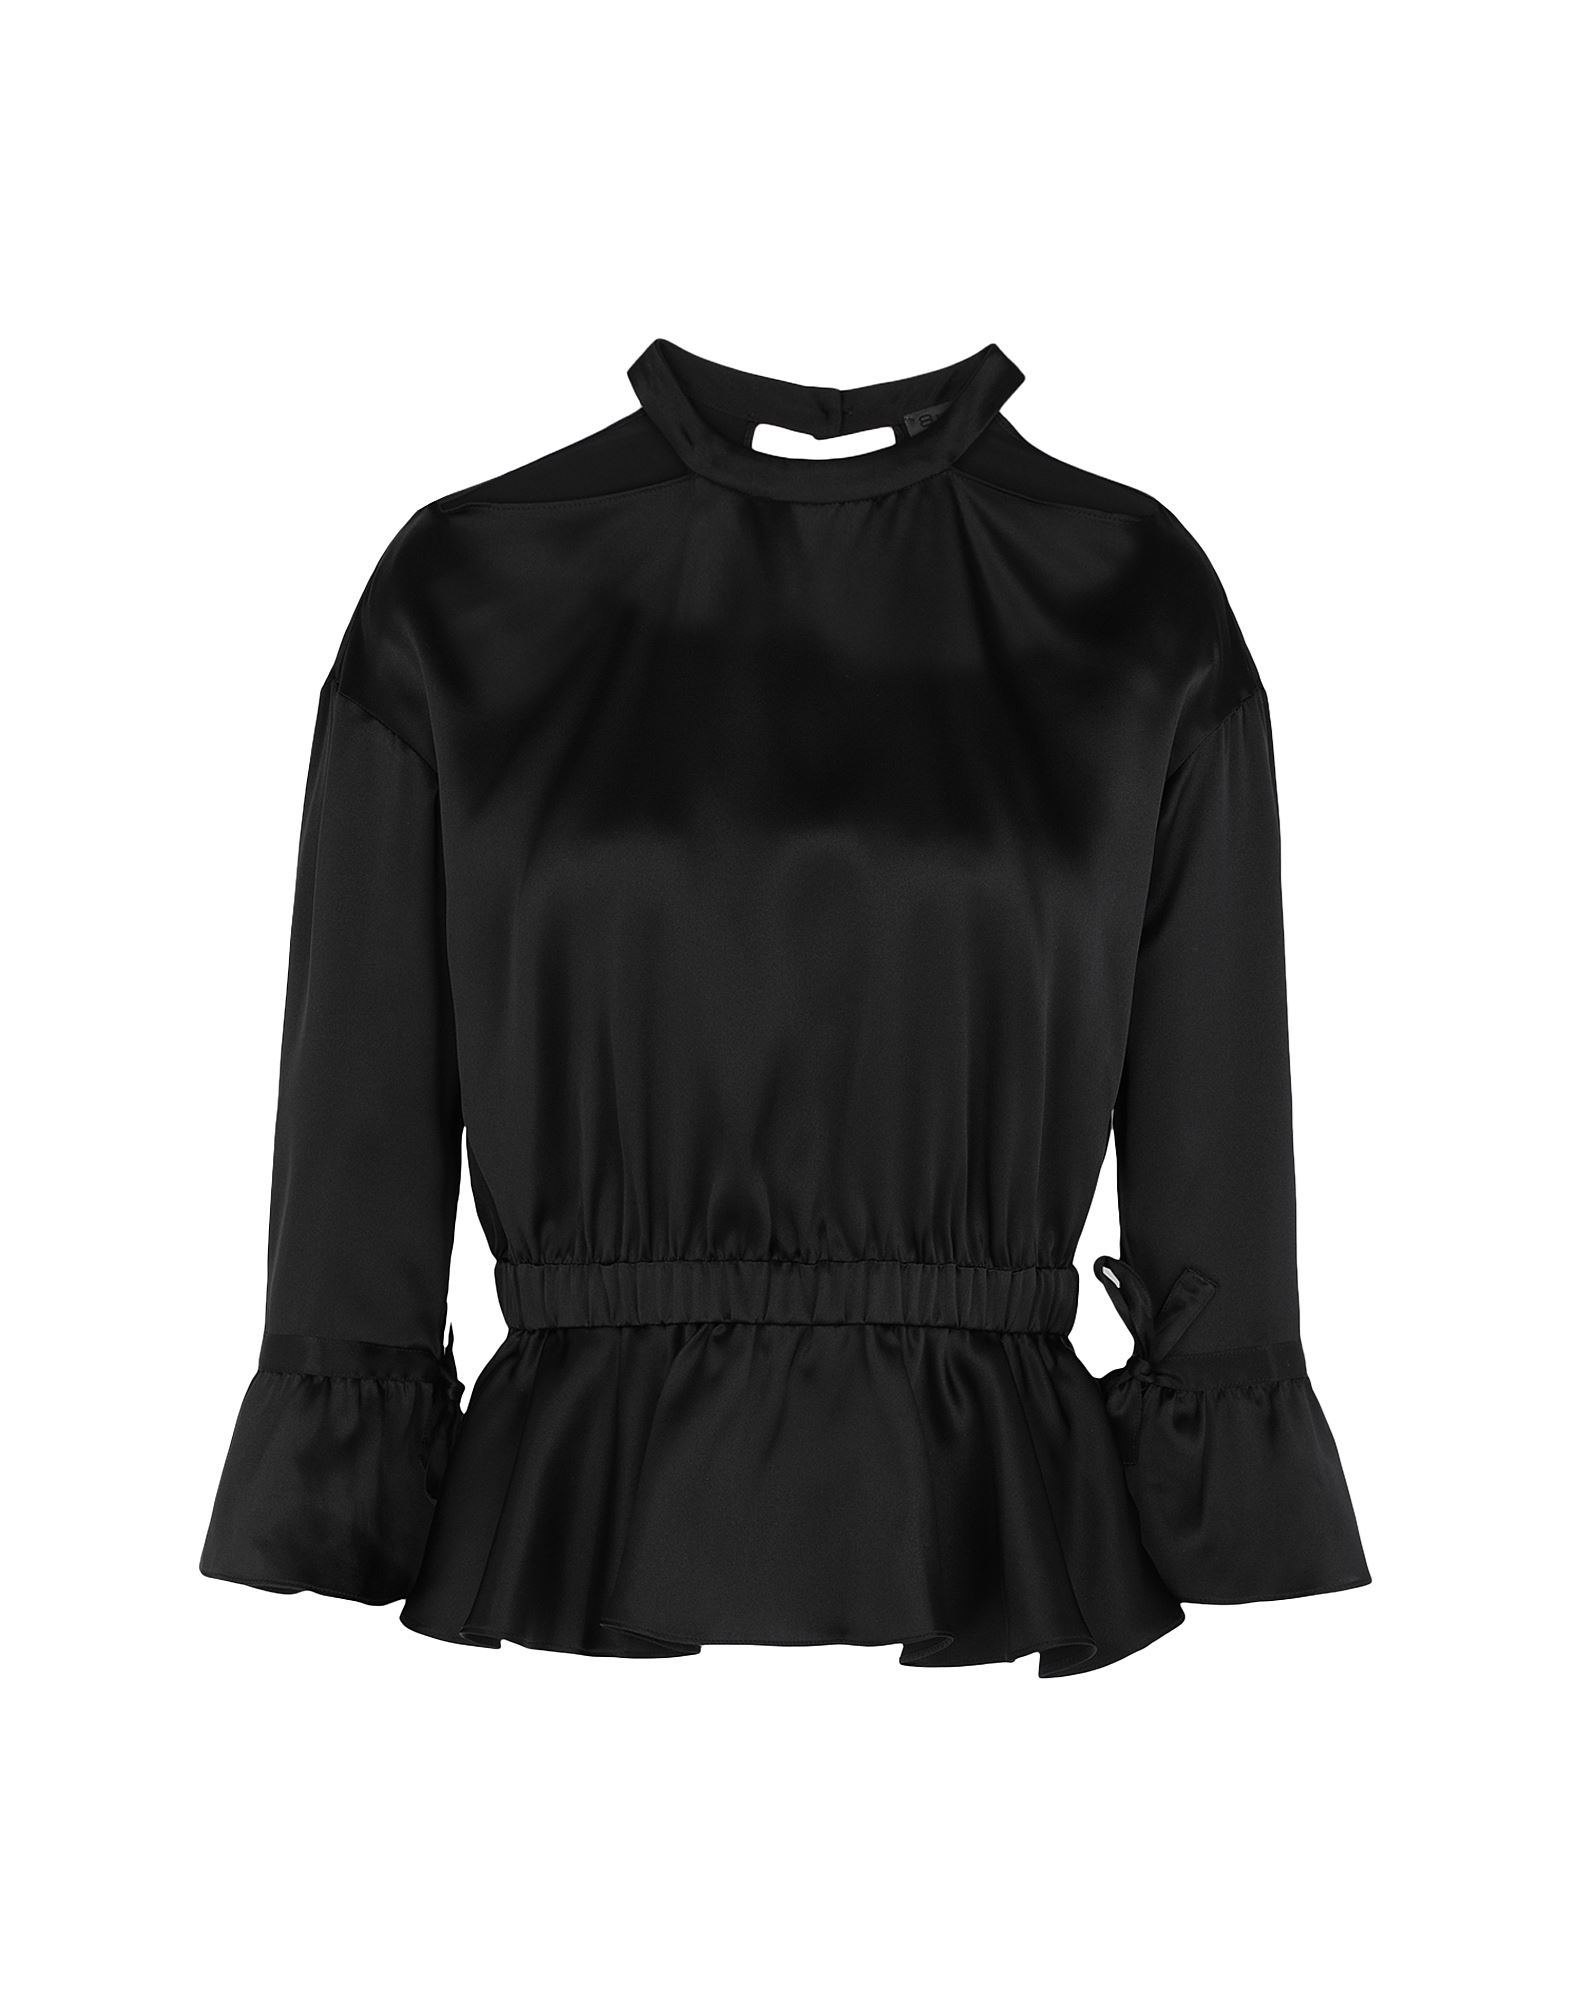 ＜YOOX＞ ★58%OFF！8 by YOOX レディース ブラウス ブラック 38 シルク 100% SILK CUT-OUT & STRING DETAIL L/SLEEVE BLOUSE